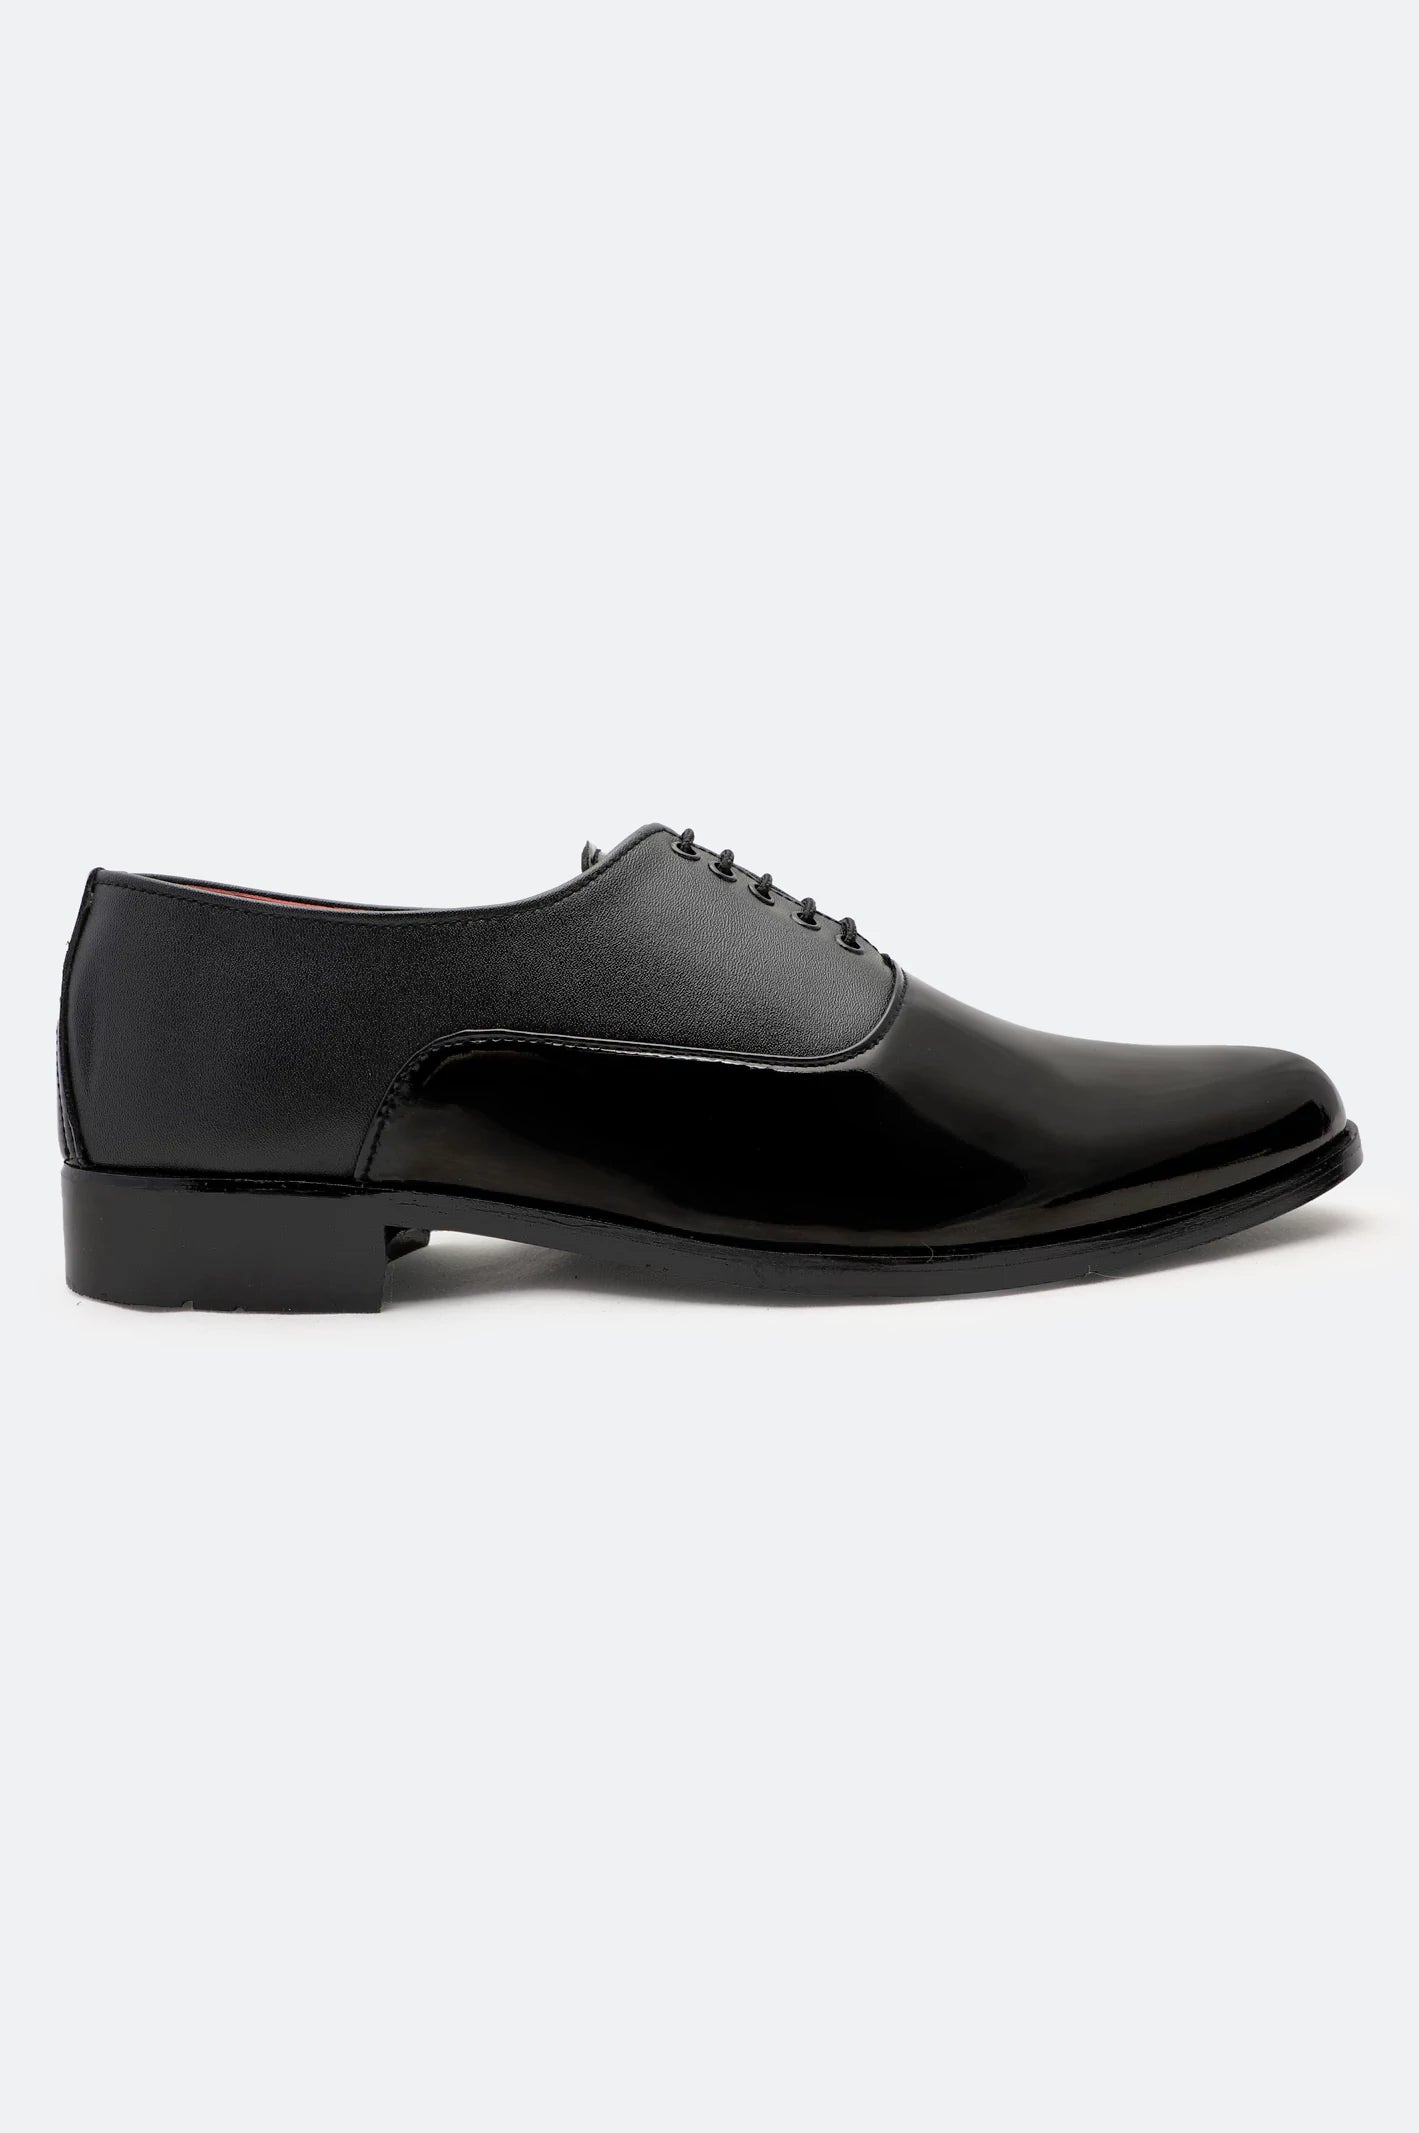 Black Formal Oxford Shoes From Diners